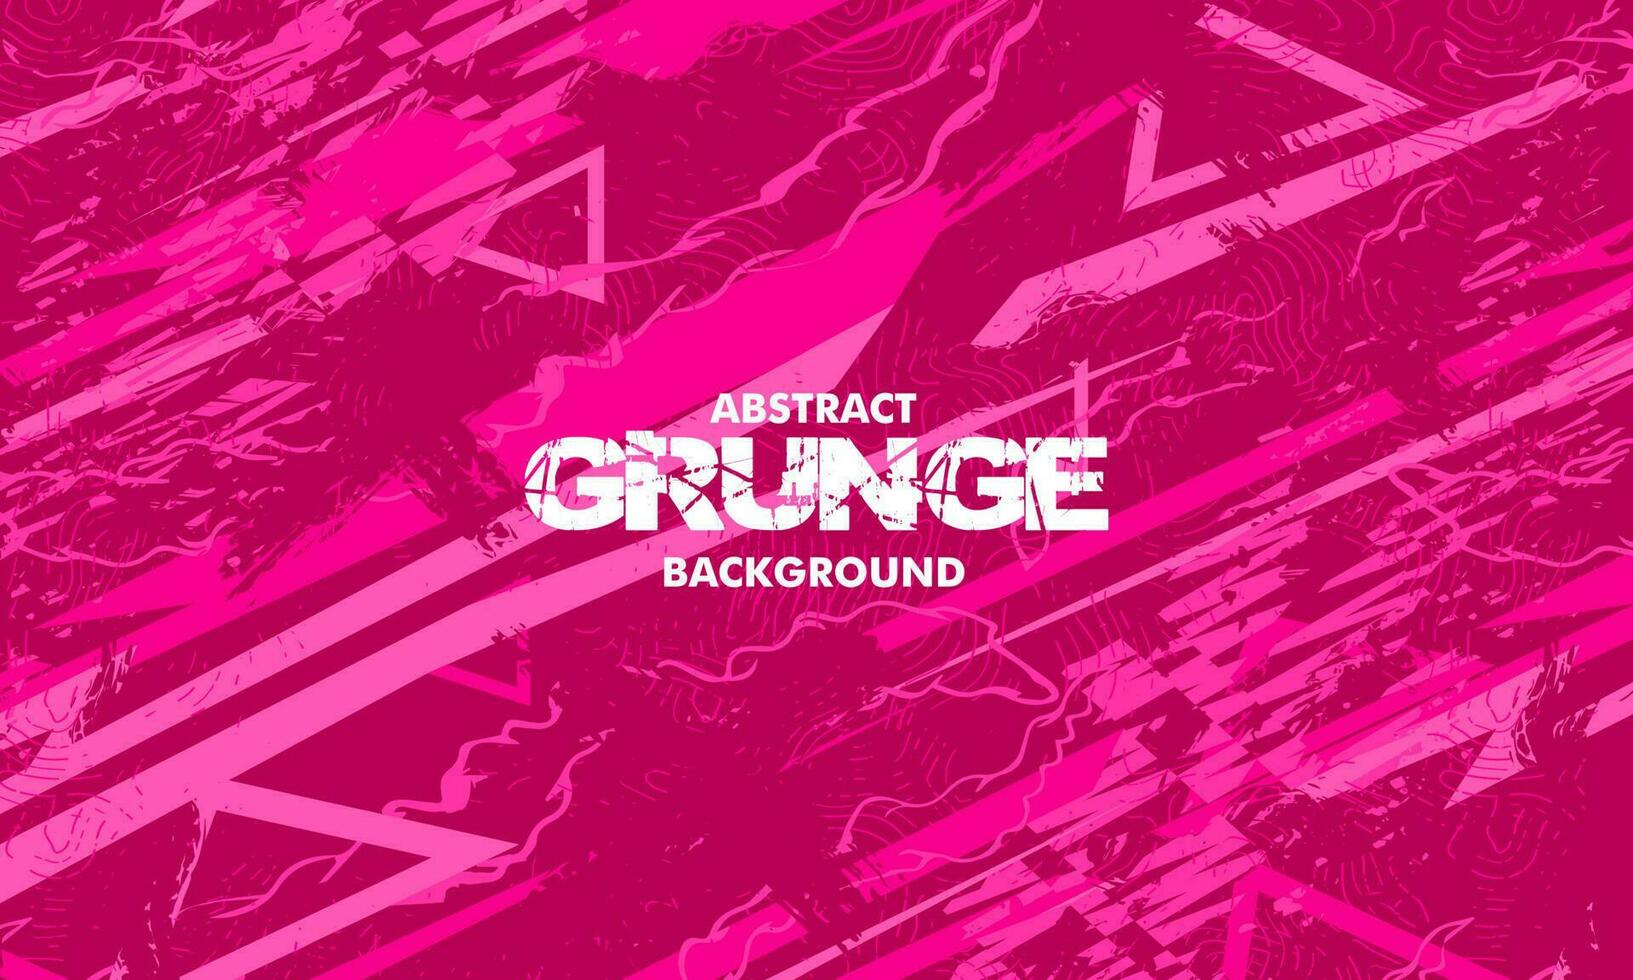 grunge abstract background design vector